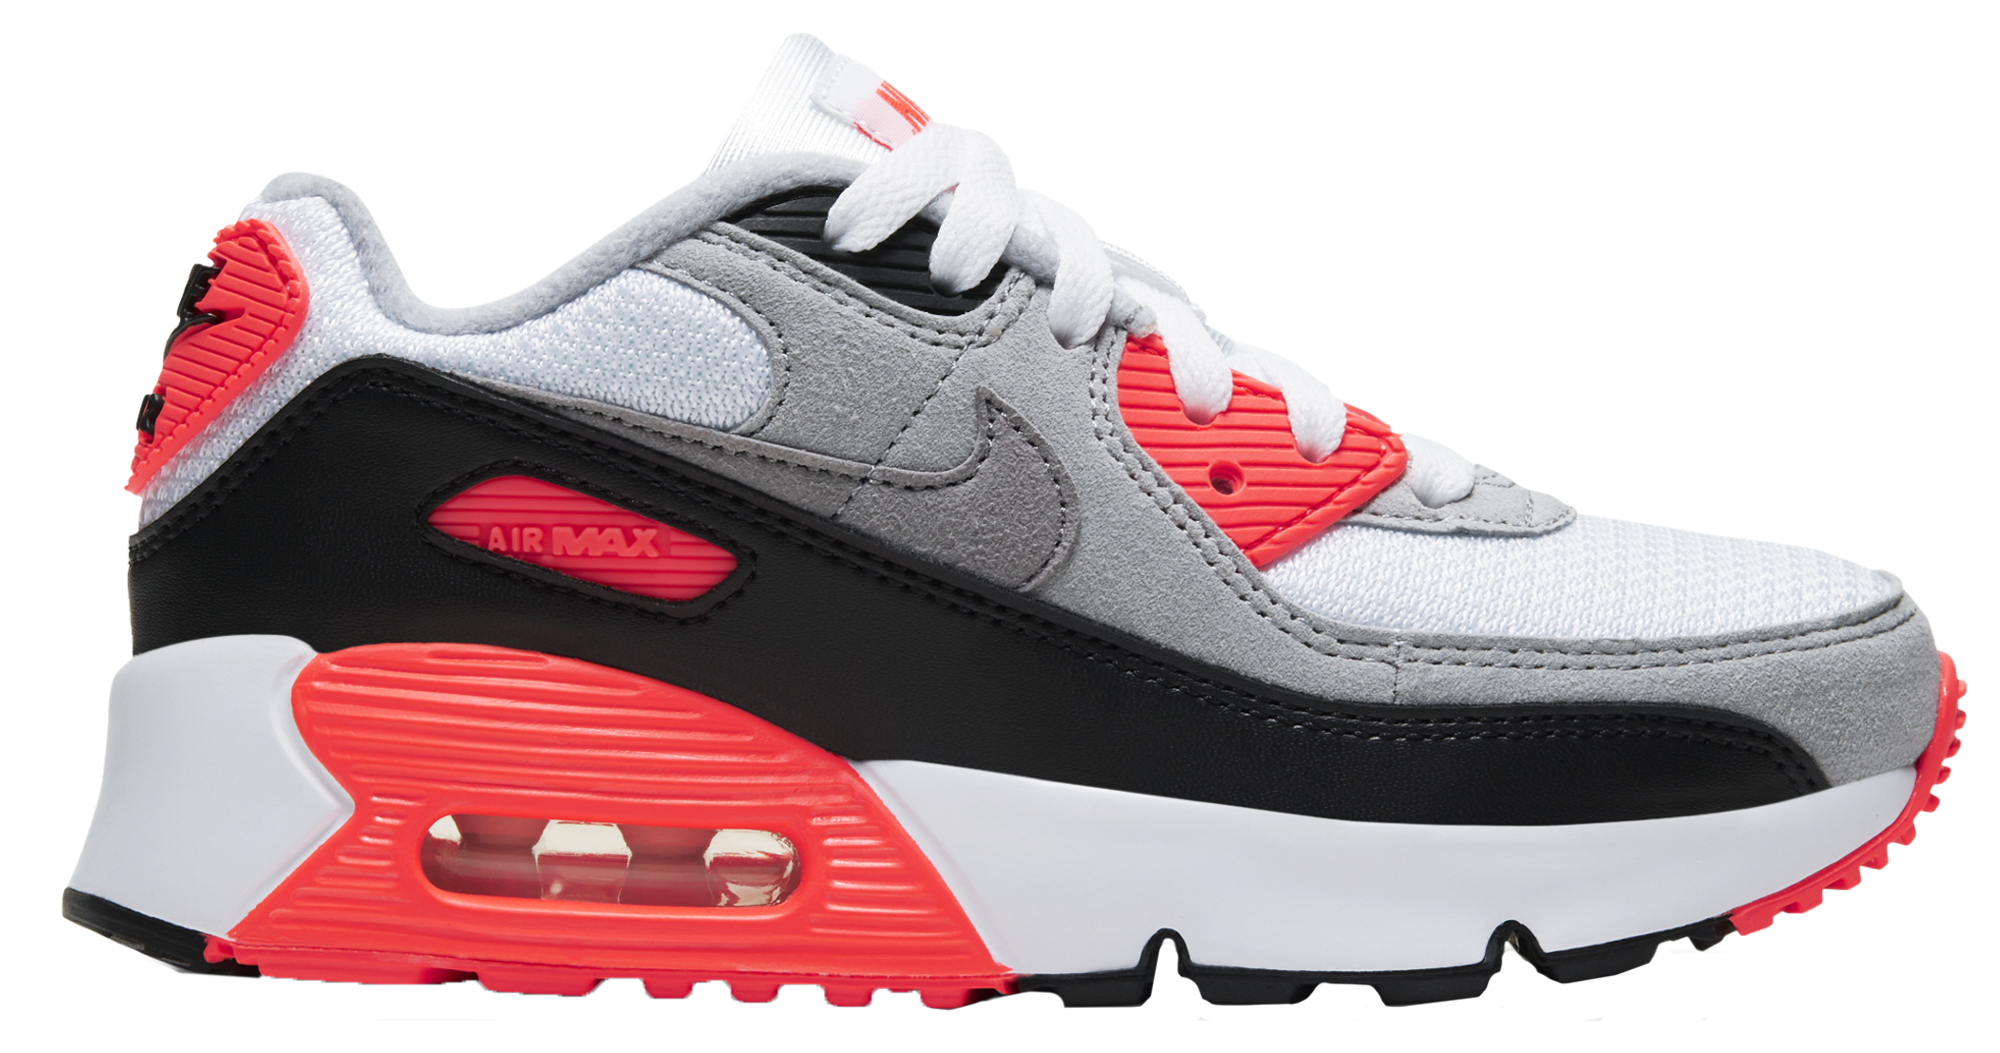 nike air max 90 red black and white